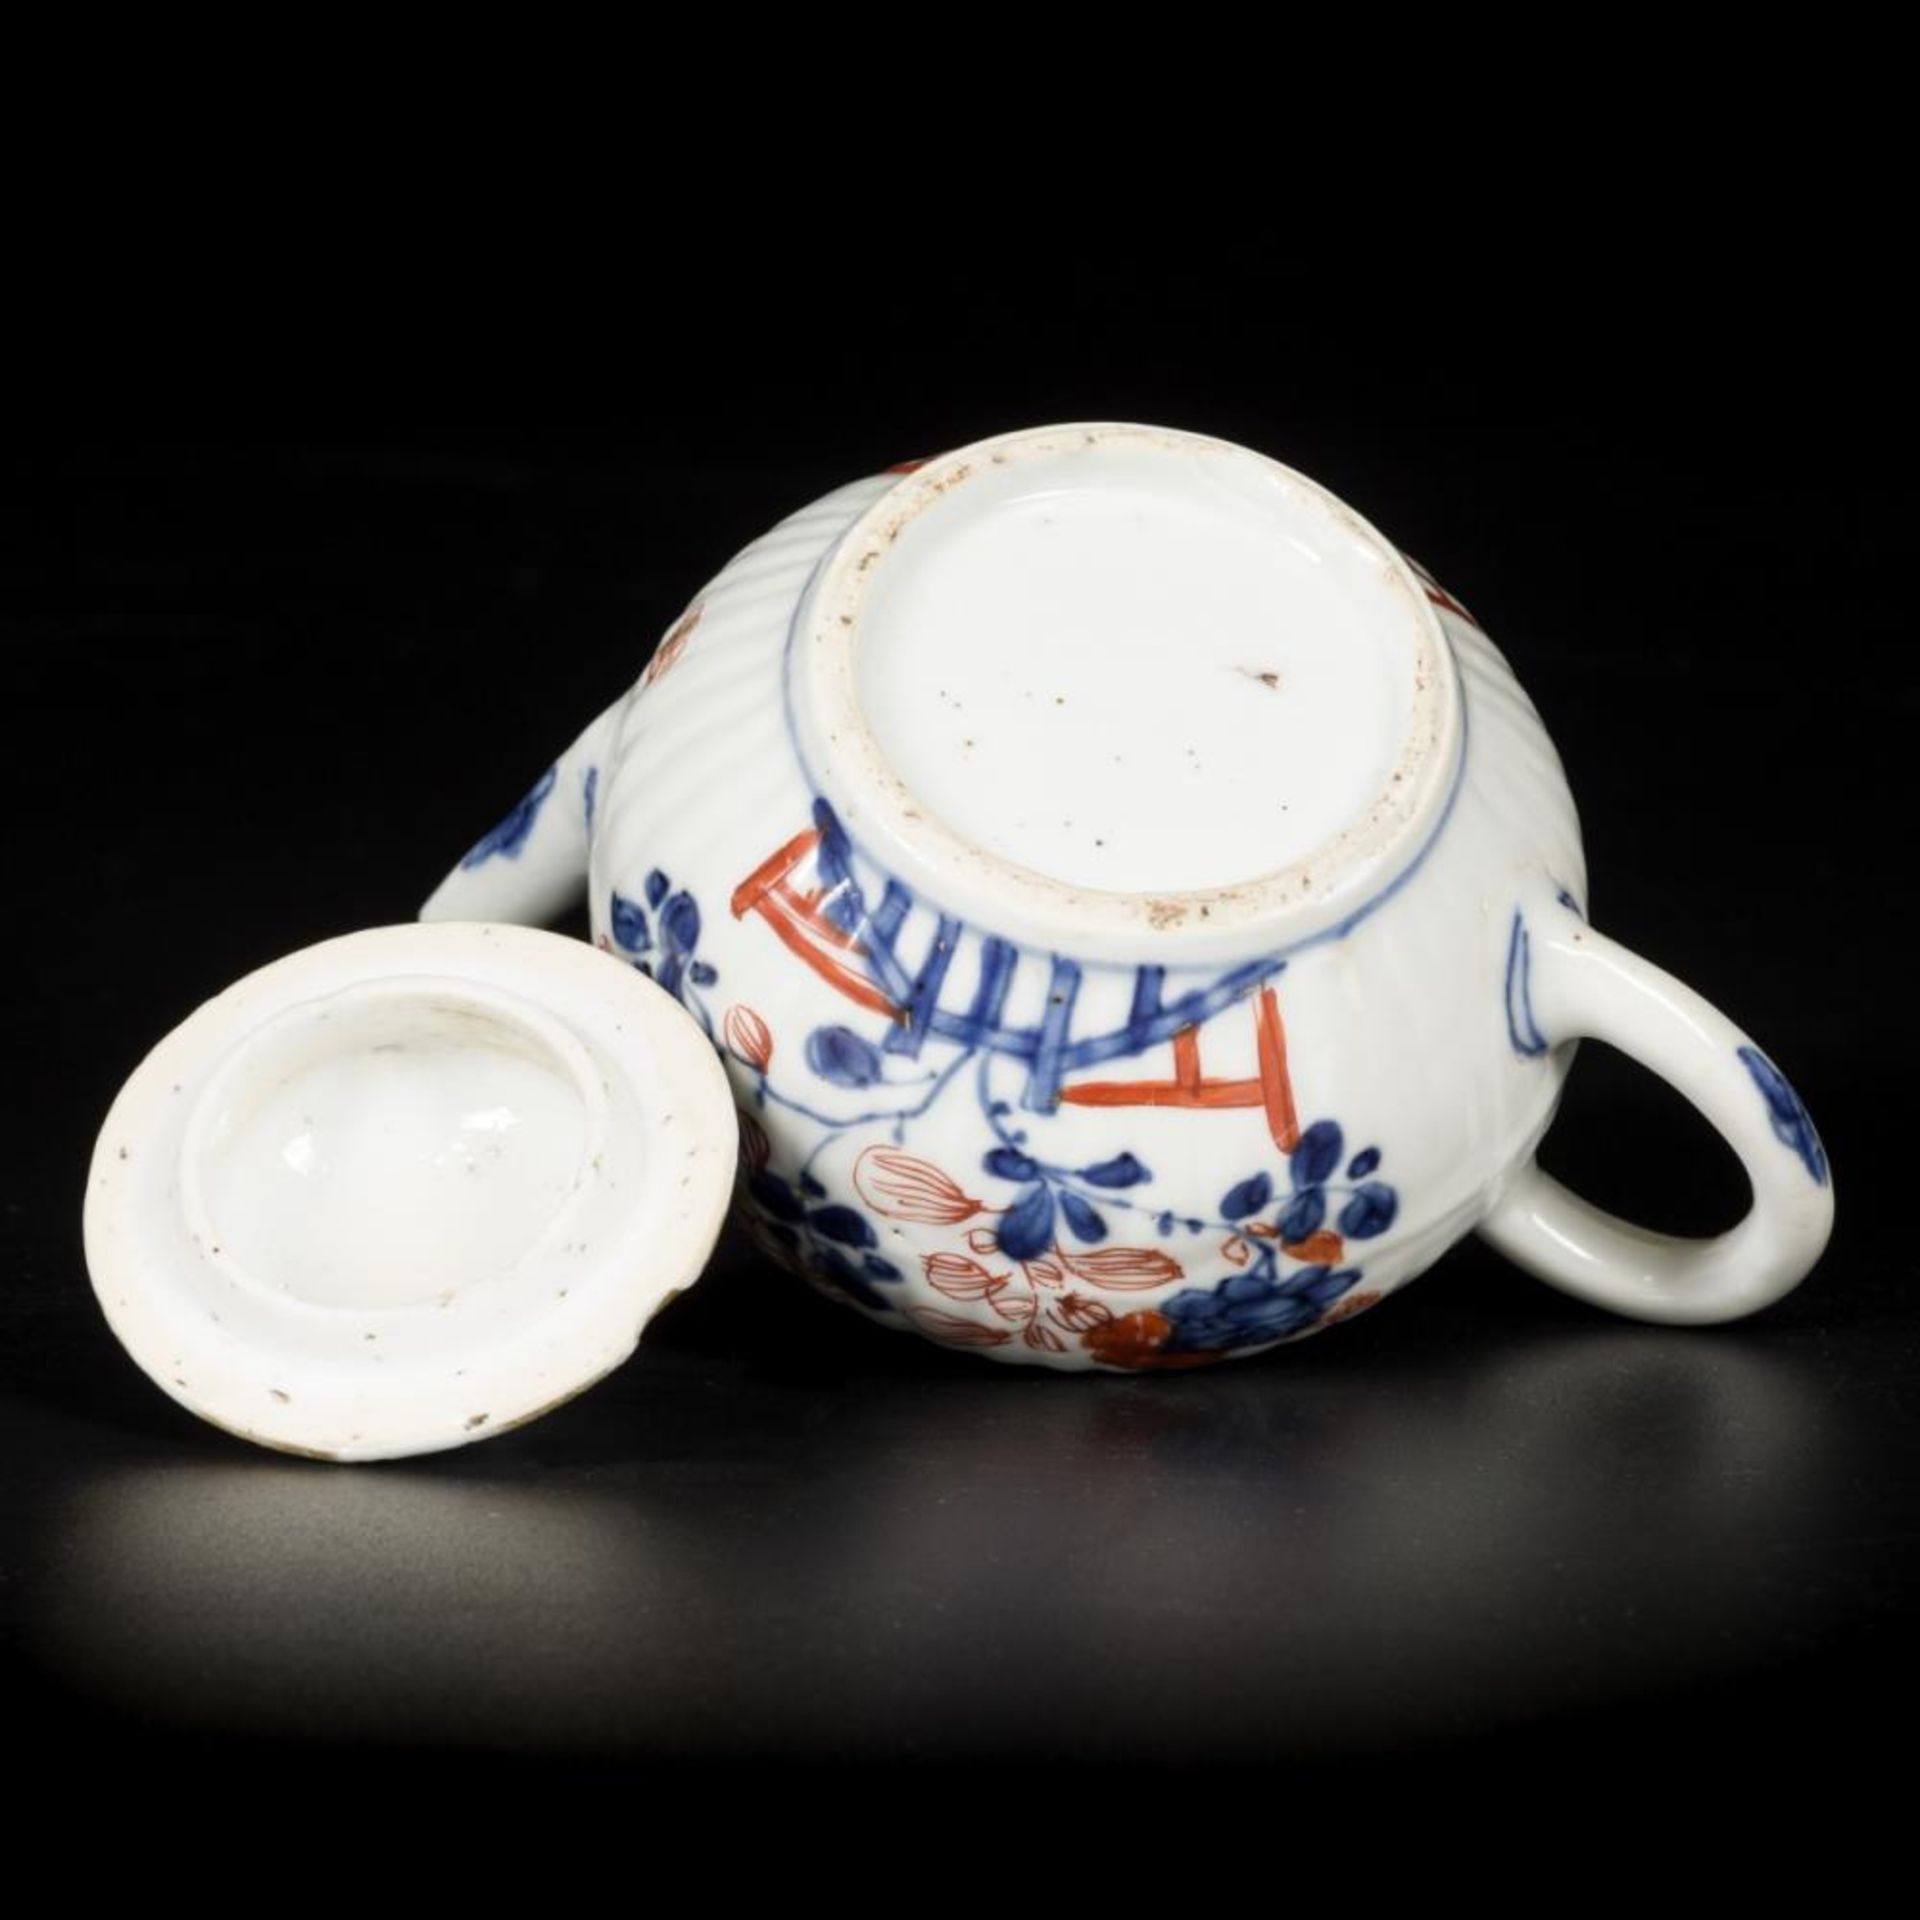 A porcelain Imari teapot with lid, China, 18th century. - Image 7 of 8